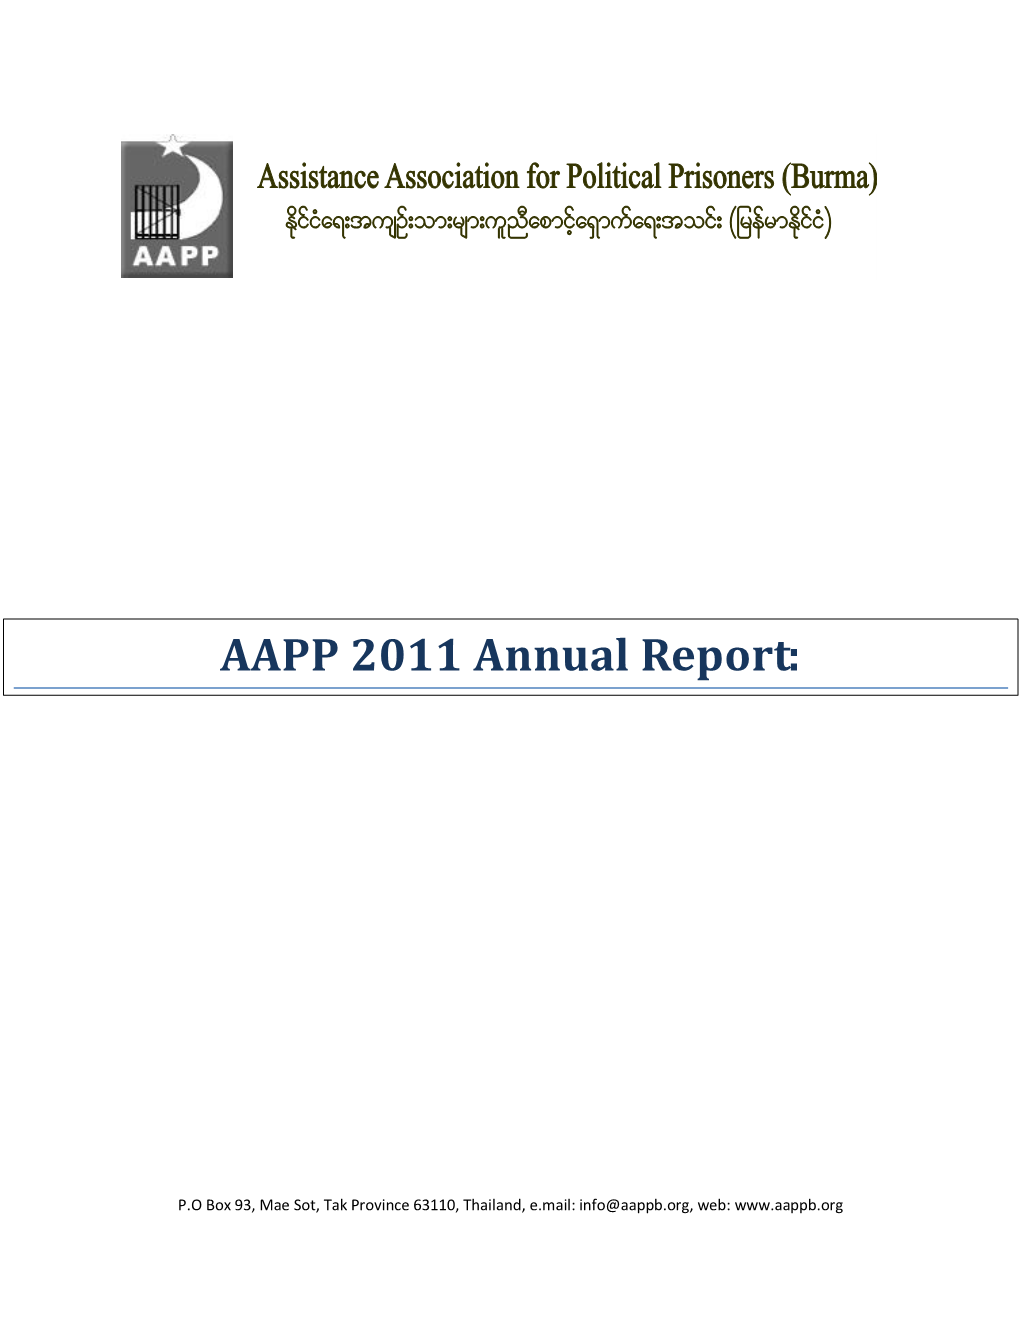 AAPP 2011 Annual Report